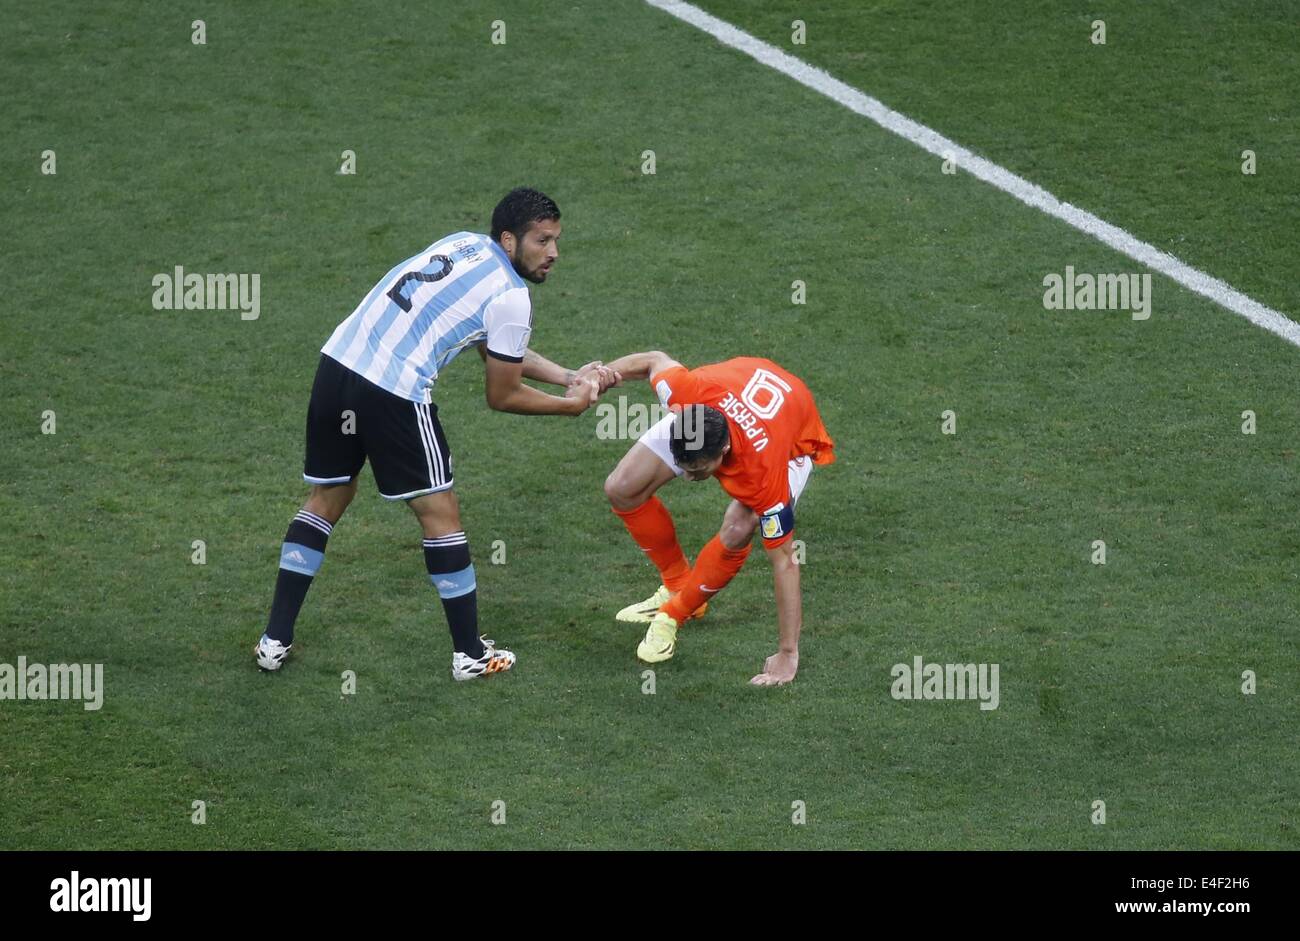 Sao Paulo, Brazil. 9th July, 2014. Argentina's Ezequiel Garay gives Netherlands' Robin van Persie a hand during a semifinal match between Netherlands and Argentina of 2014 FIFA World Cup at the Arena de Sao Paulo Stadium in Sao Paulo, Brazil, on July 9, 2014. Credit:  Liao Yujie/Xinhua/Alamy Live News Stock Photo